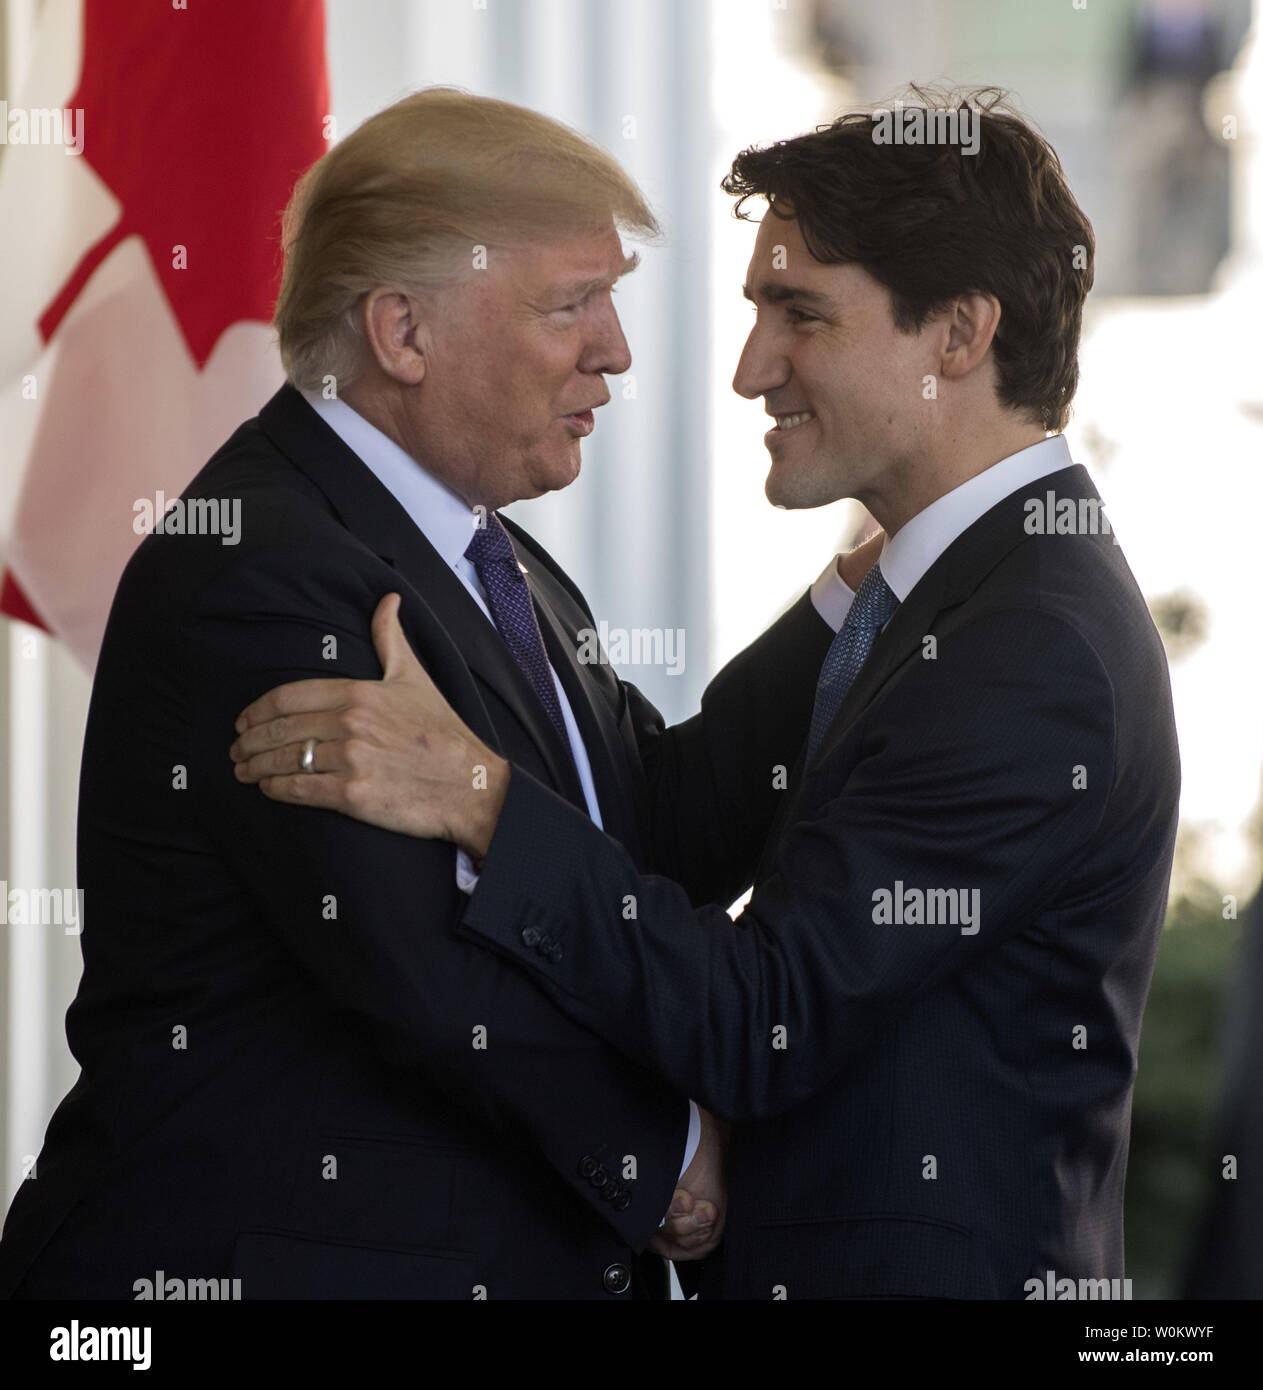 U.S. President Donald Trump greets Canada's Prime Minister Justin Trudeau to the West Wing of the White House in Washington D.C. on February 13, 2017. The two leaders will have meetings and a press conference later in the day.   Photo by Pat Benic/UPI Stock Photo